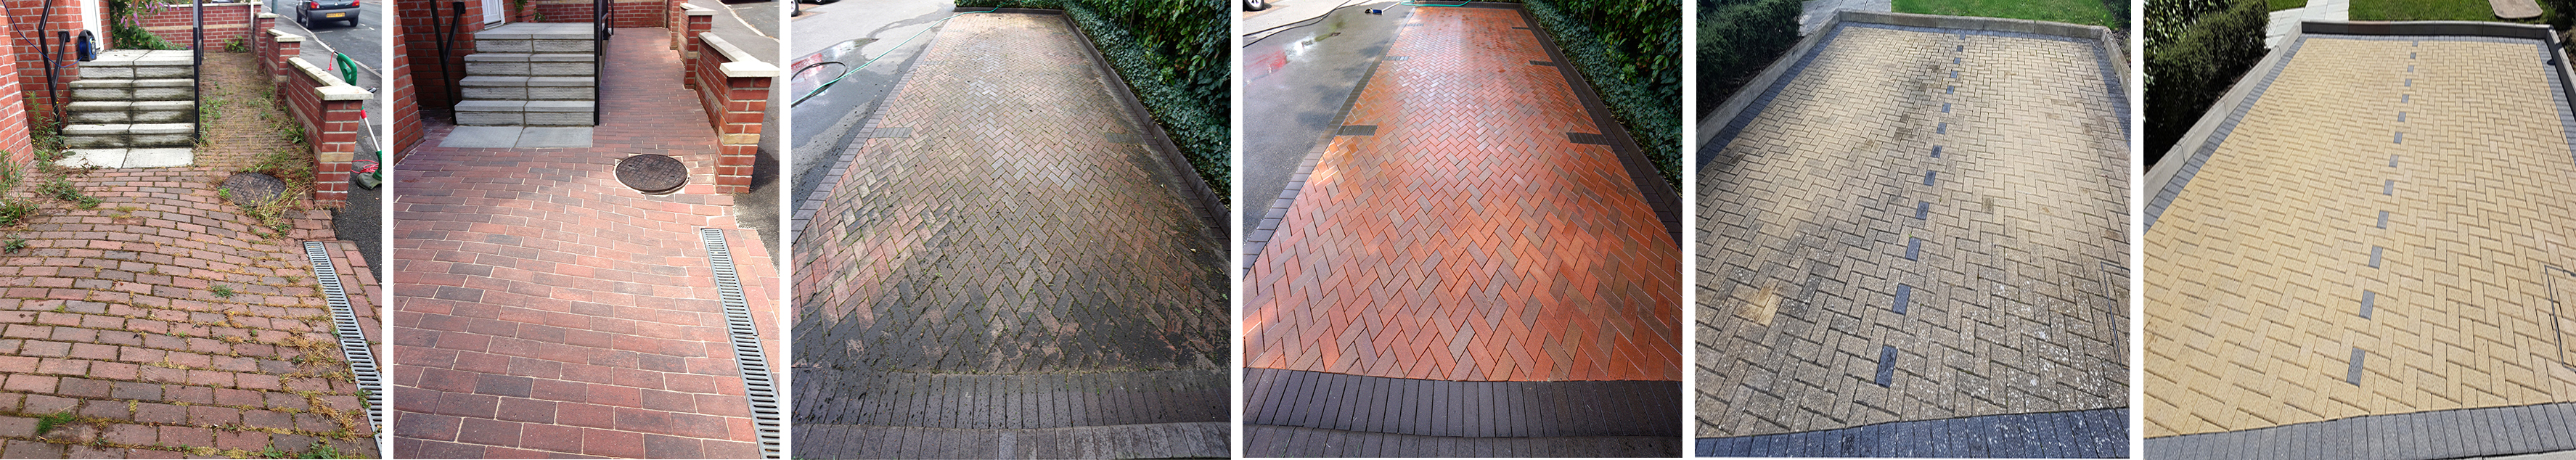 Driveway Cleaning Services in Ringwood, Hampshire